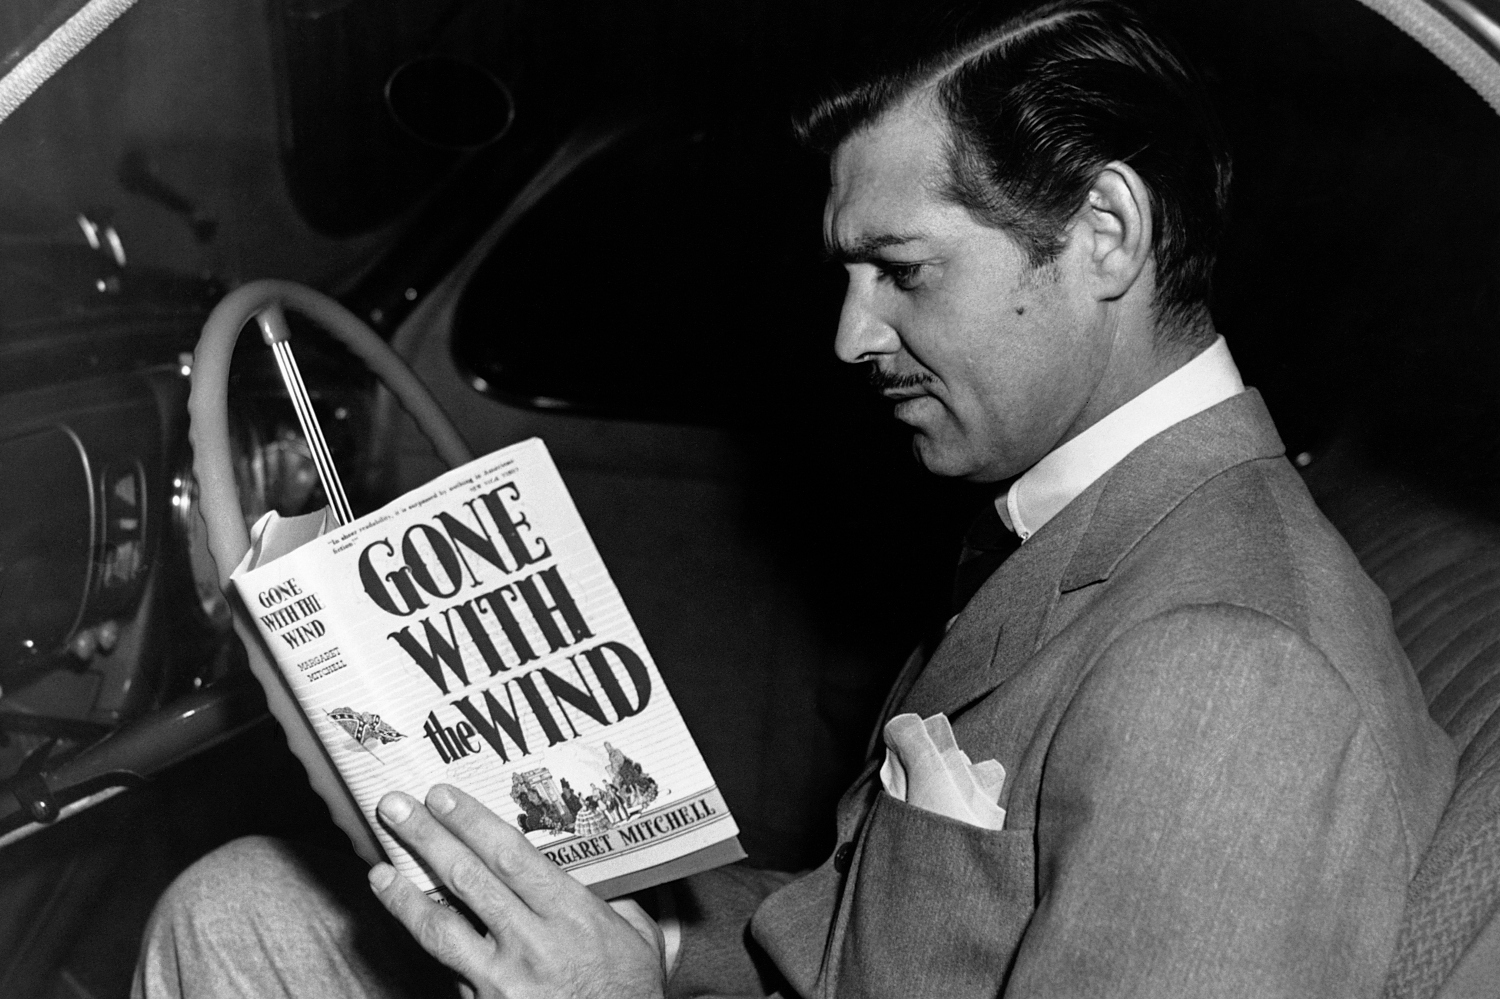 The actor Clark Gable, who played Rhett Butler in the 1939 film Gone with the Wind, reads a copy of the novel by Margaret Mitchell on which the film was based. 